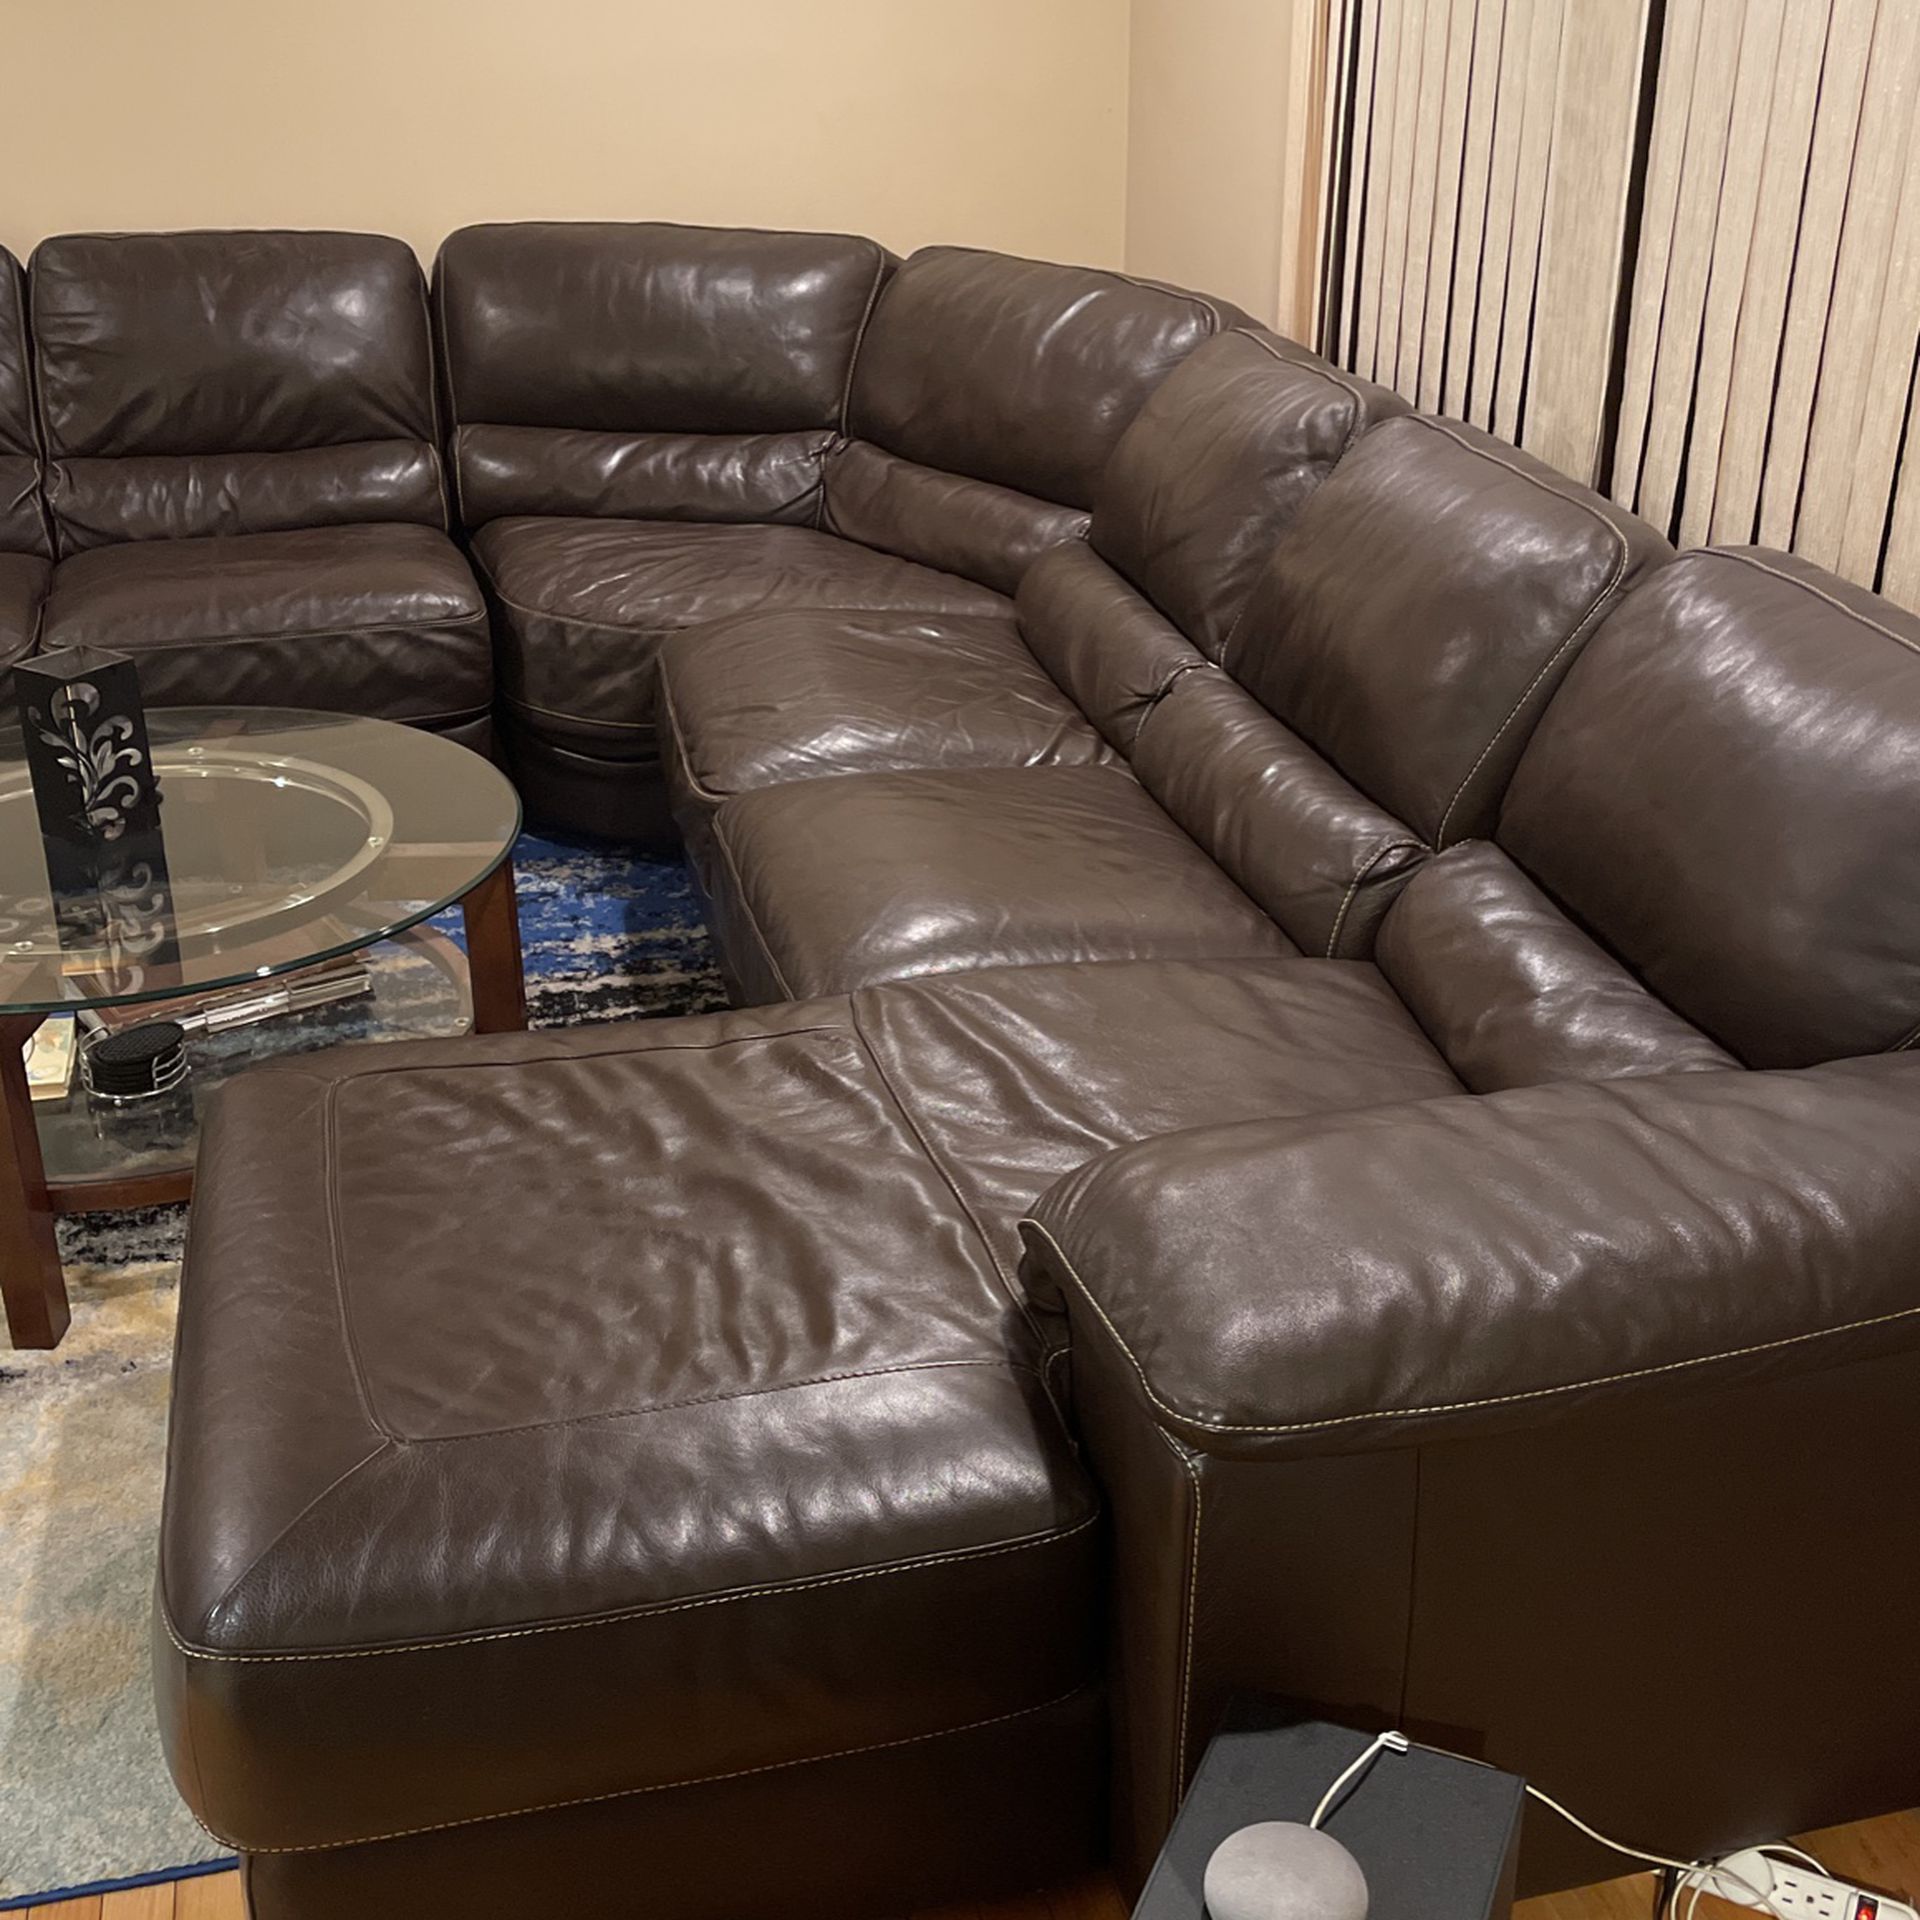 Raymooor & Flanagan Brown Real Leather Sectional $3500  Brand New 2 Yrs Old